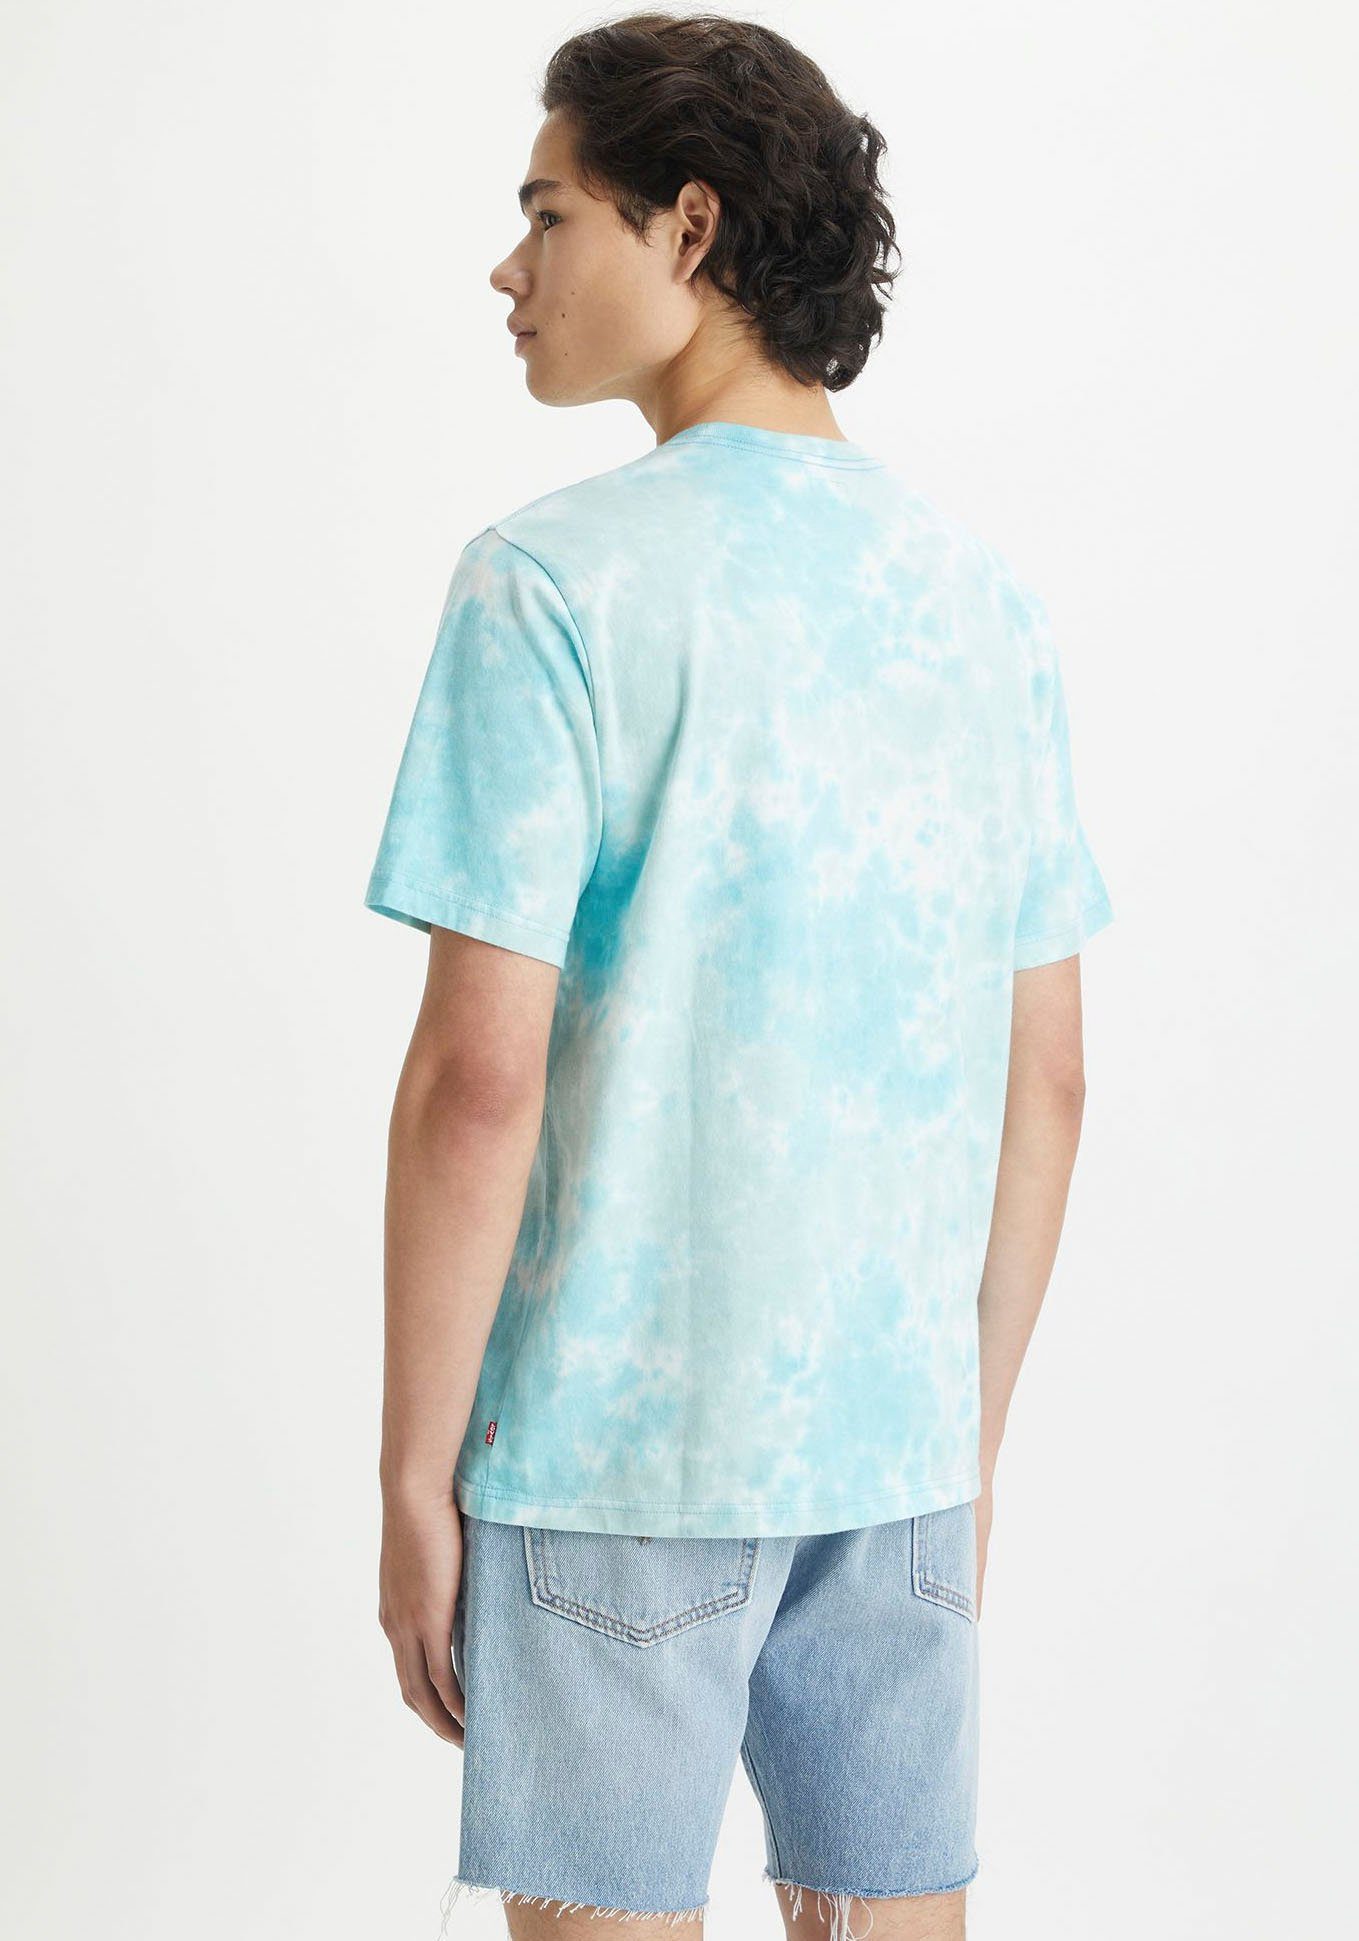 T-Shirt dye FIT RELAXED Levi's® TEE blue